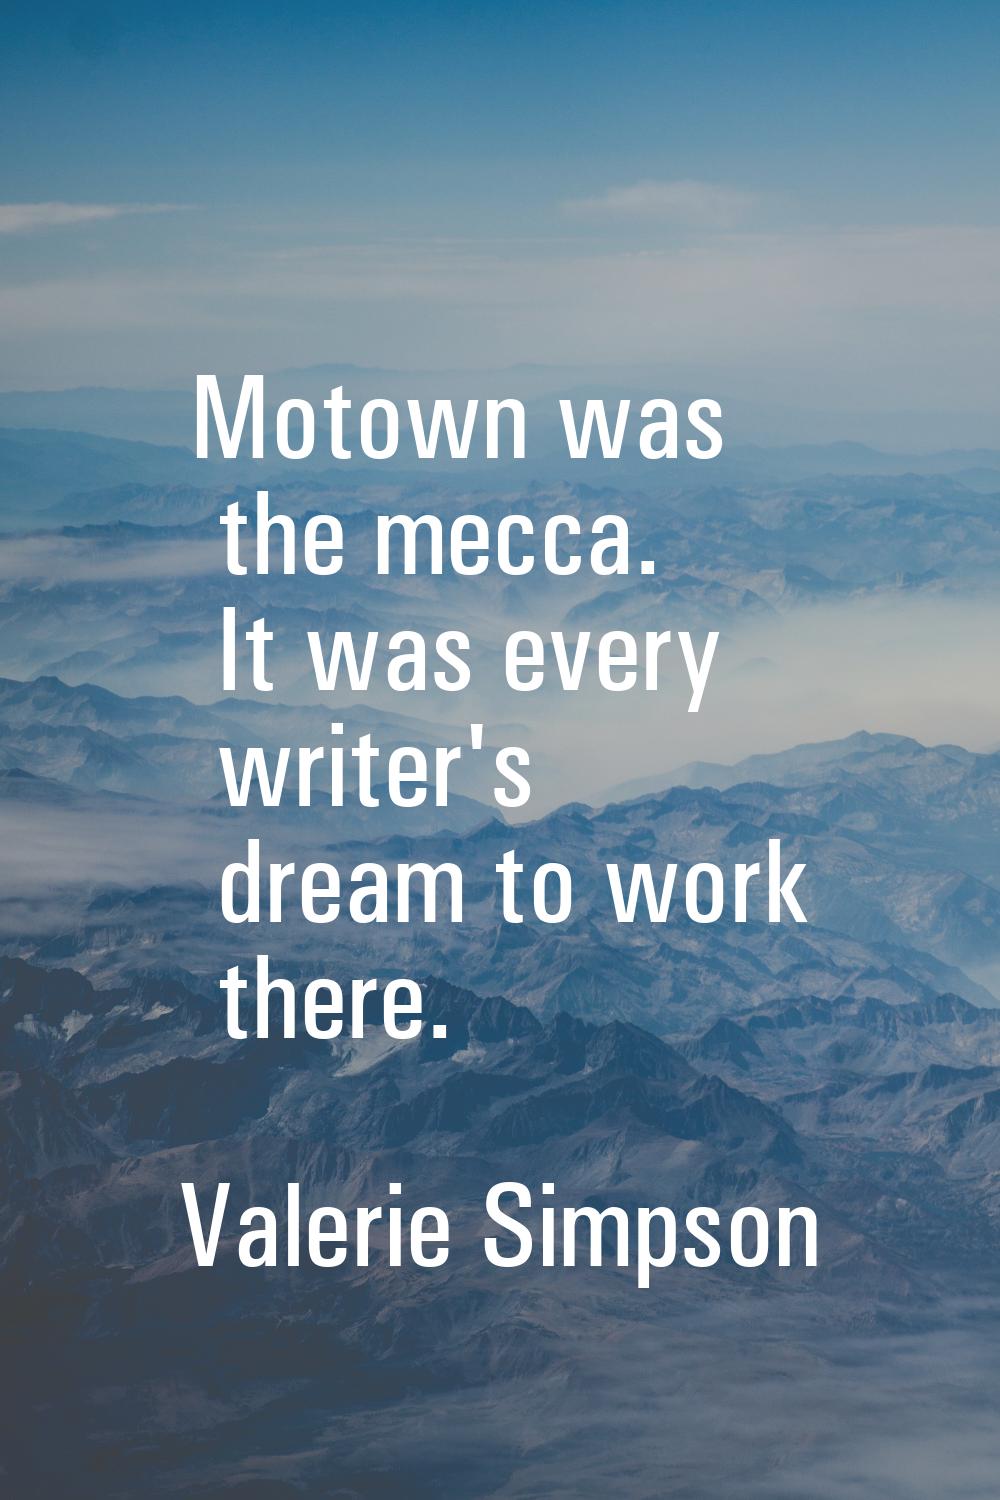 Motown was the mecca. It was every writer's dream to work there.